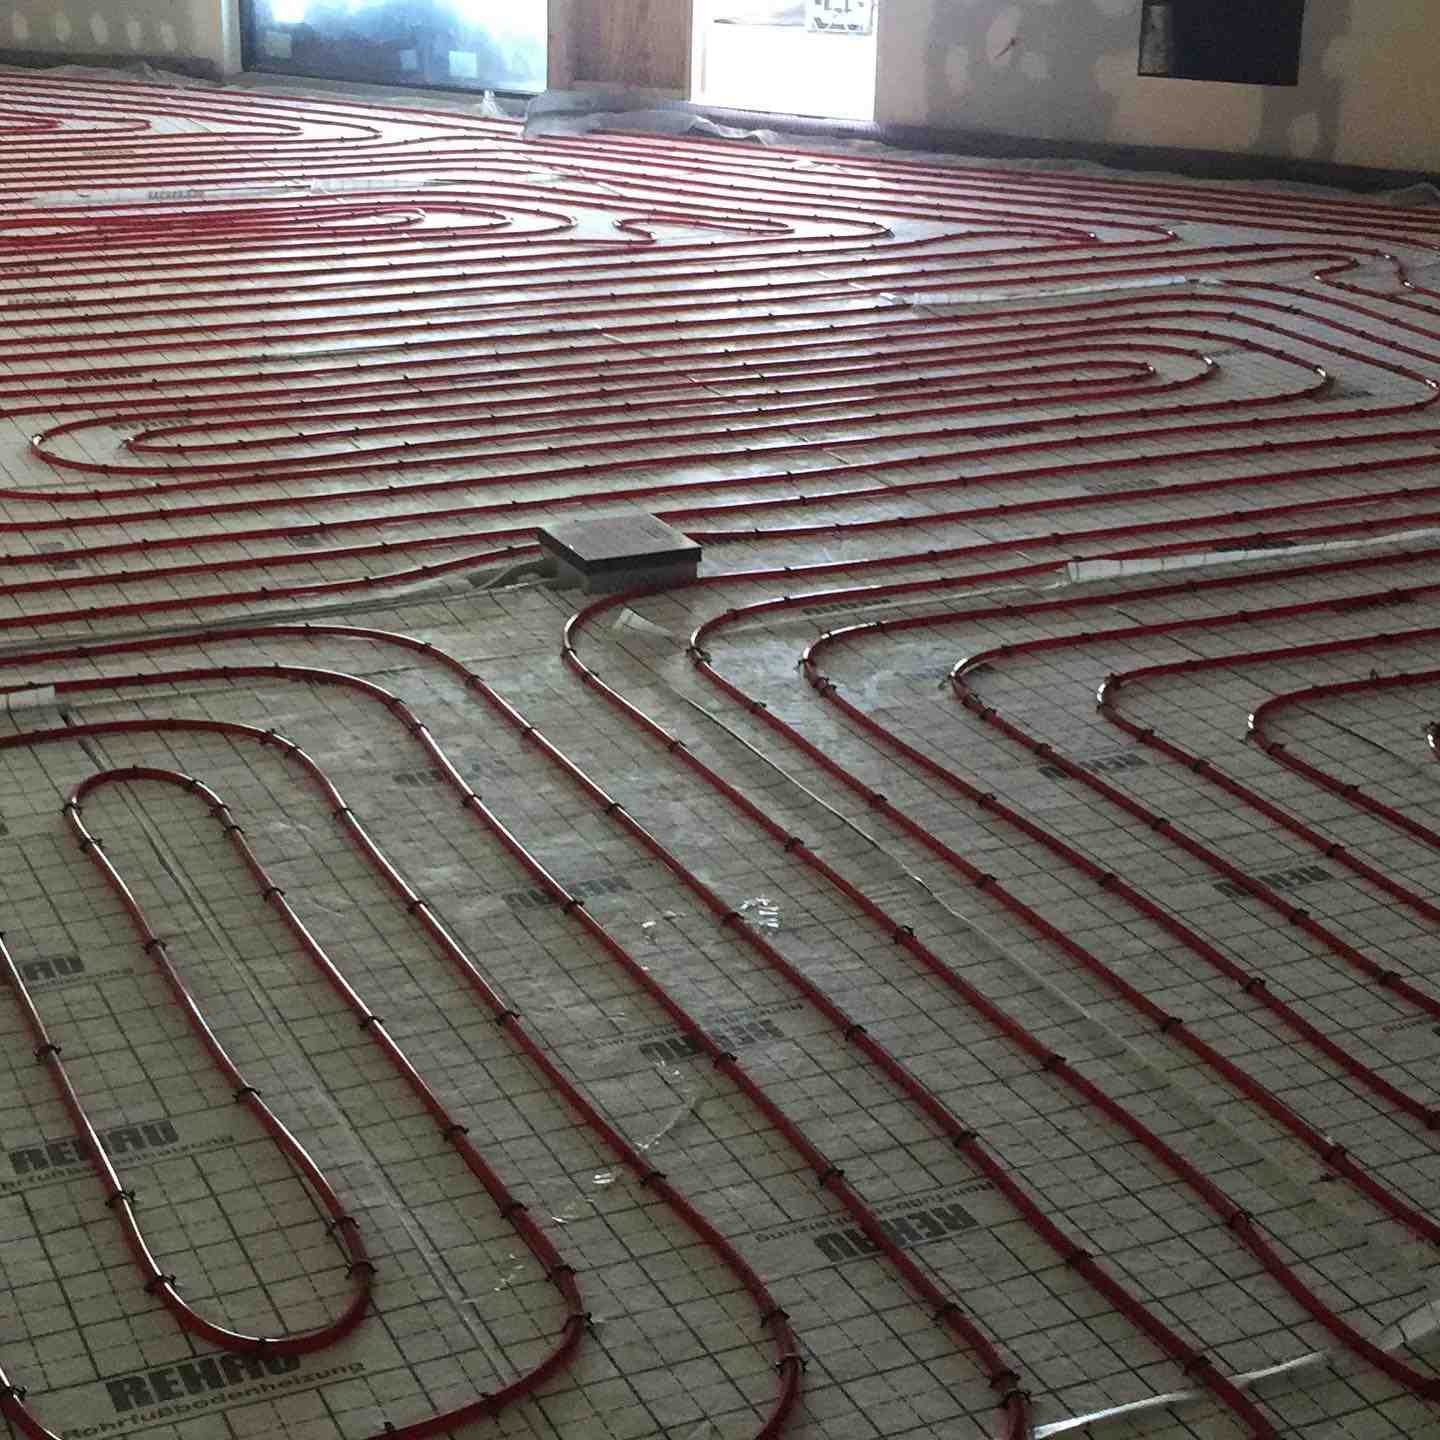 Hydronic Heating